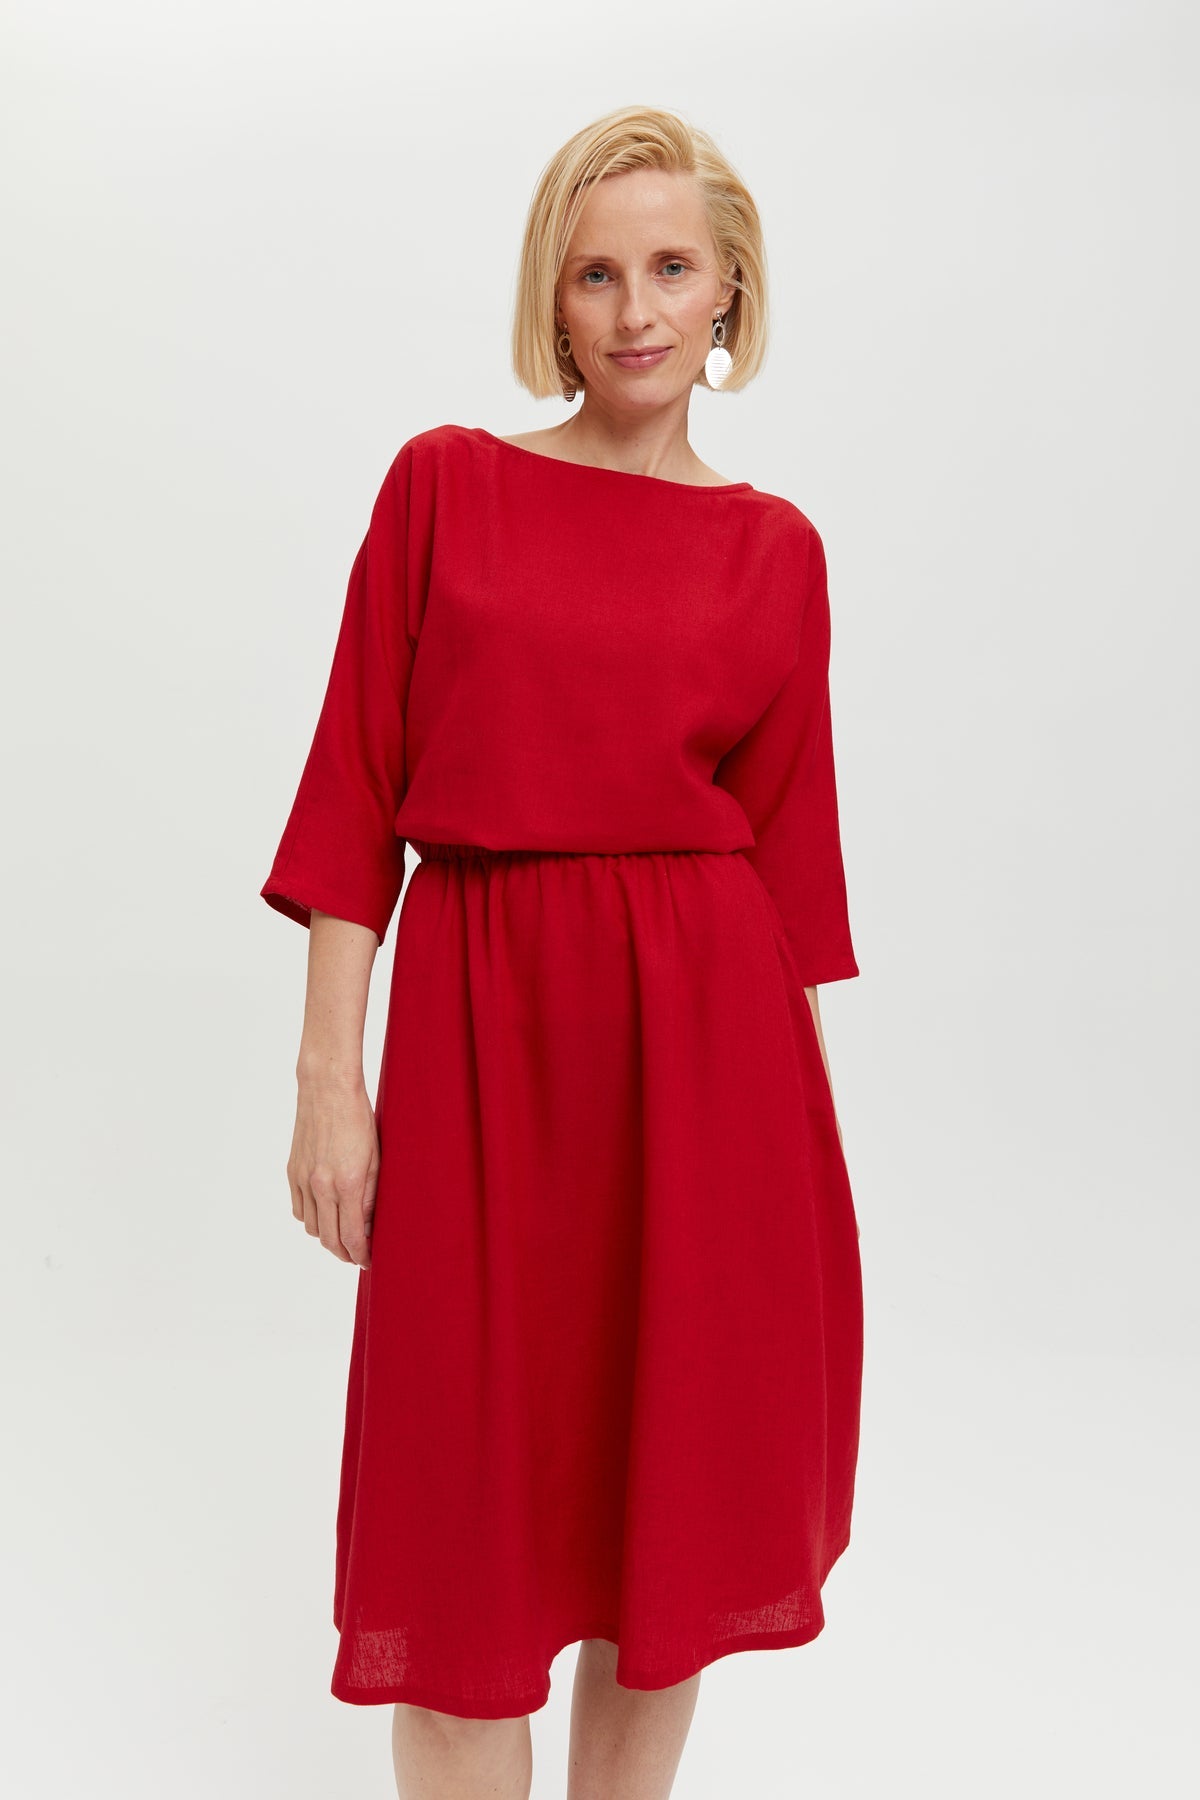 Nane | Linen dress with 3/4 sleeves in red by Ayani